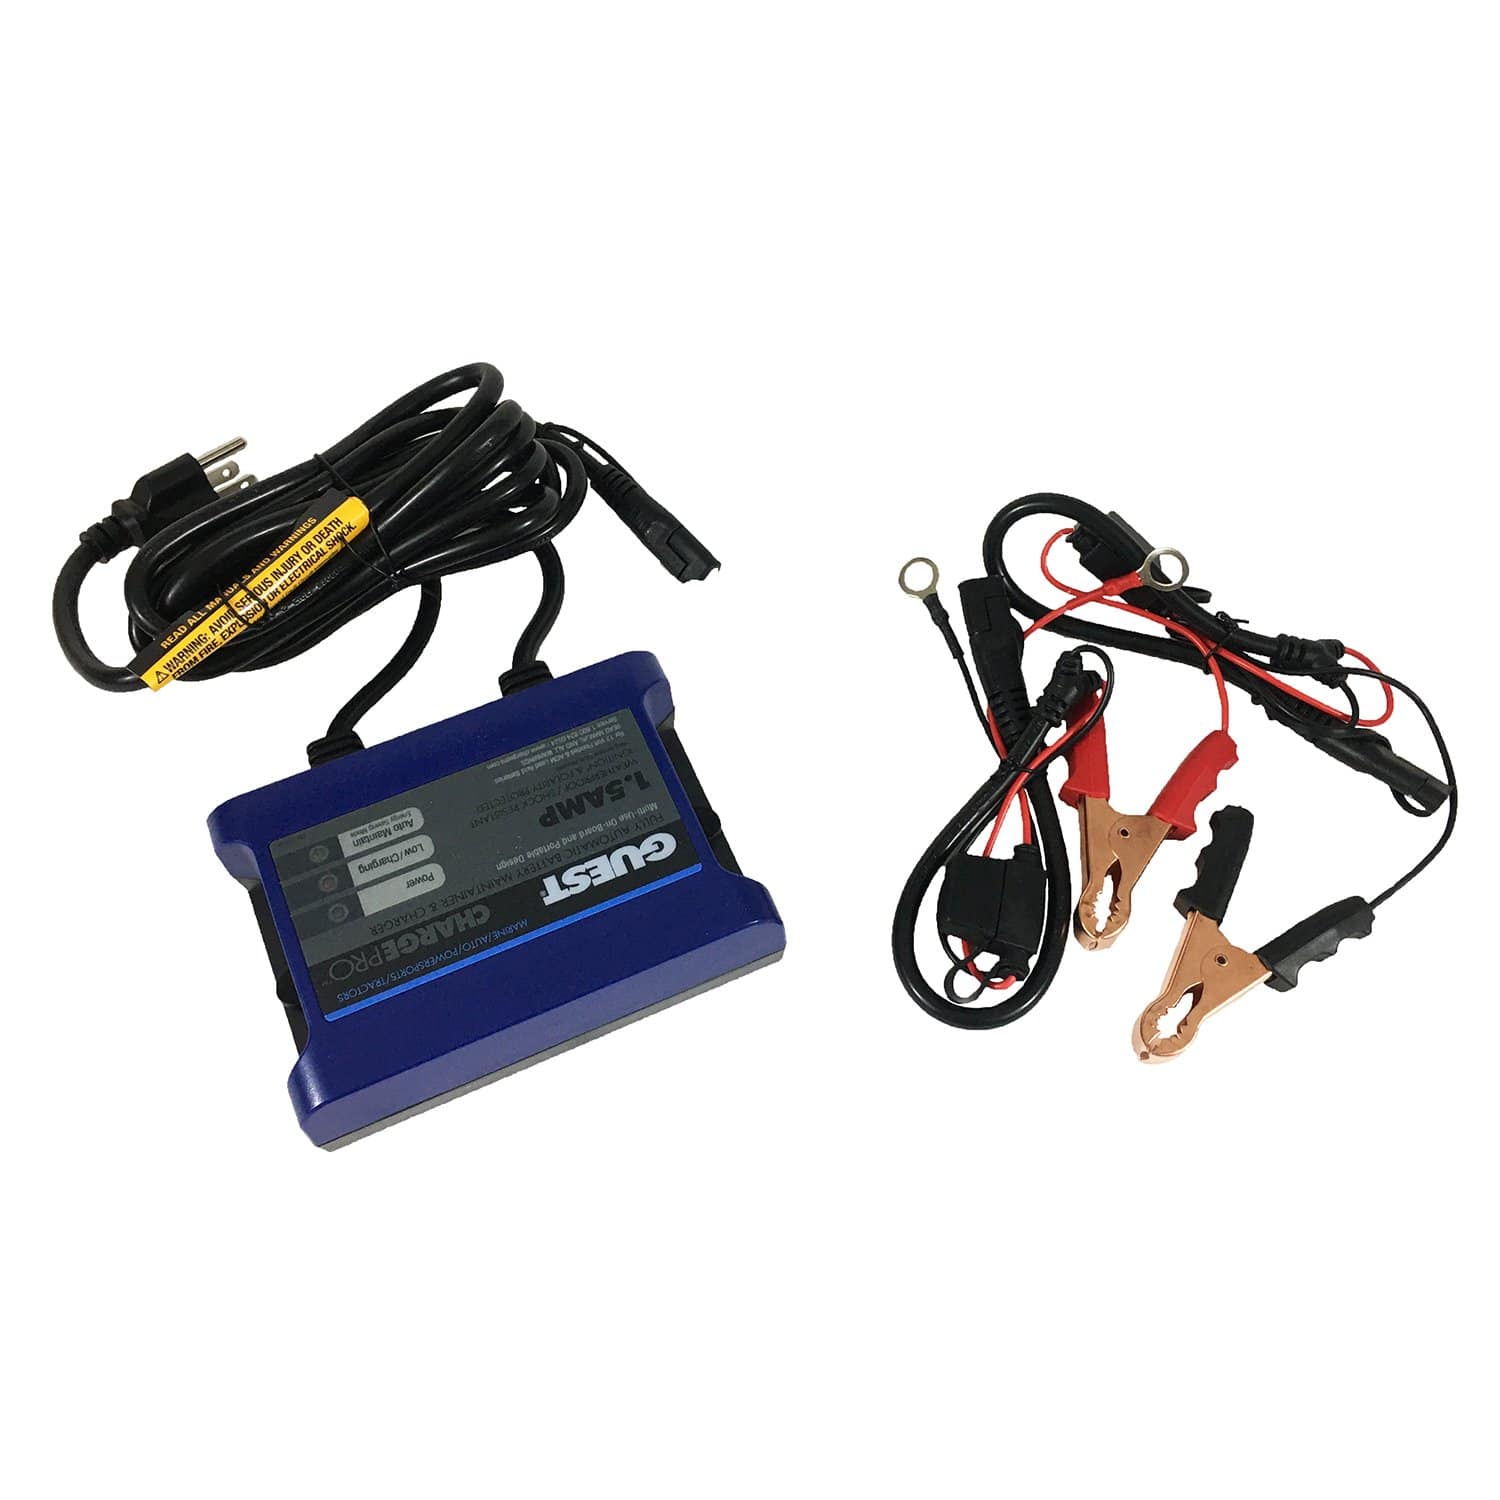 Guest 2701A Power Products 1.5 Maintainer, 1.5a, 1 Bank, 120v Battery Maintainer / Charger